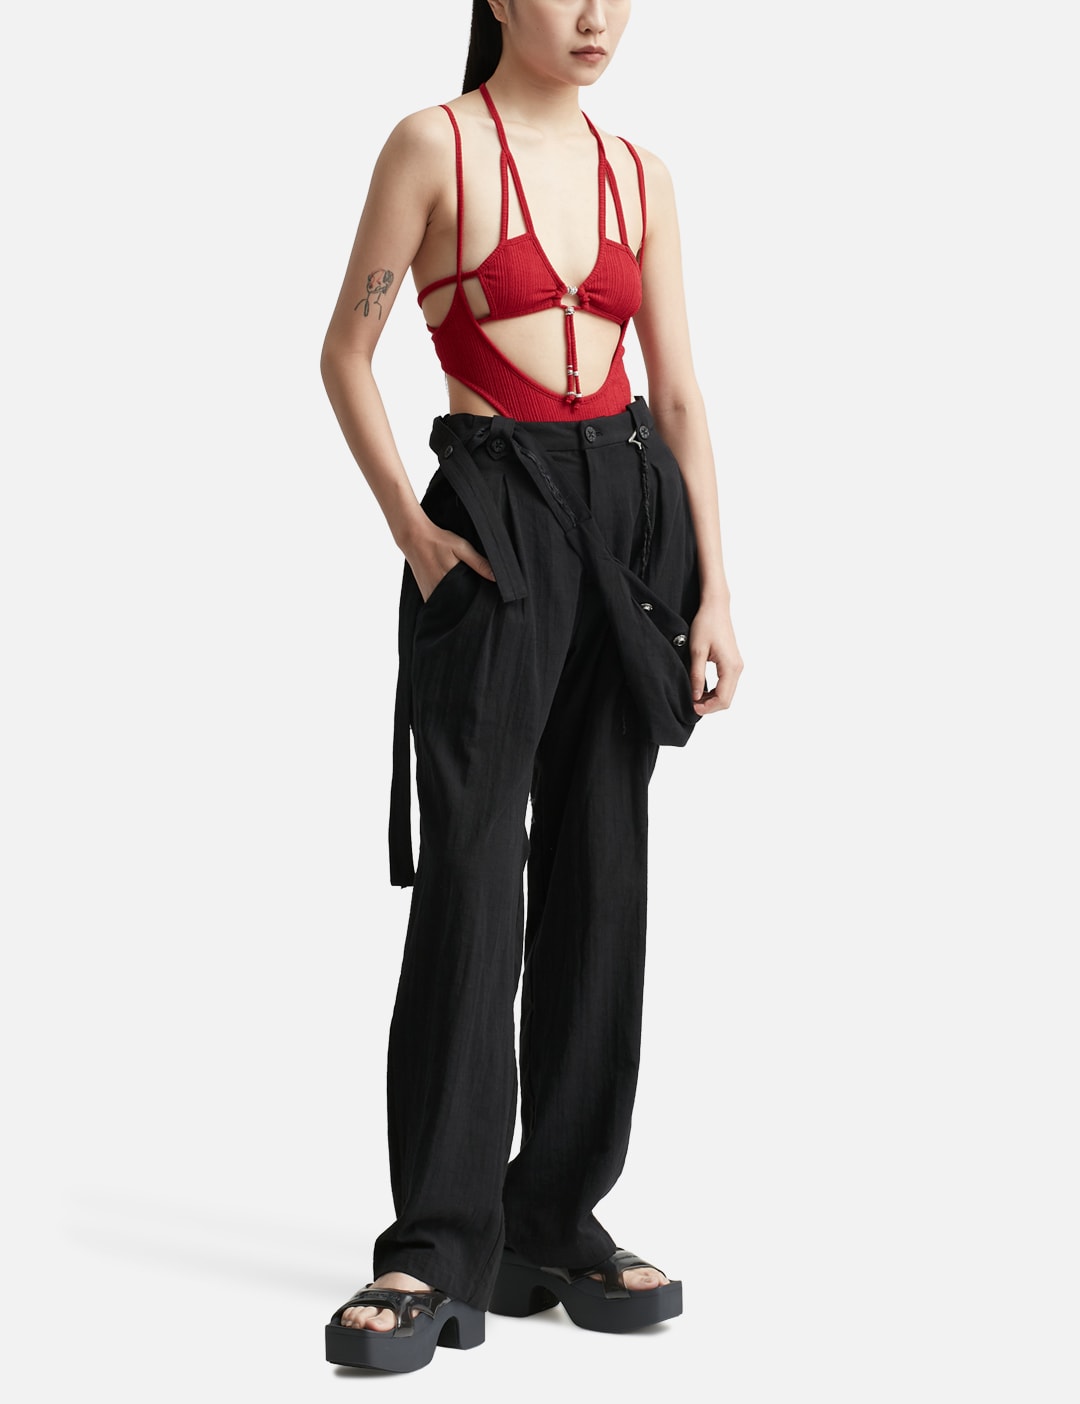 Hyein Seo - Low Rise Pants  HBX - Globally Curated Fashion and